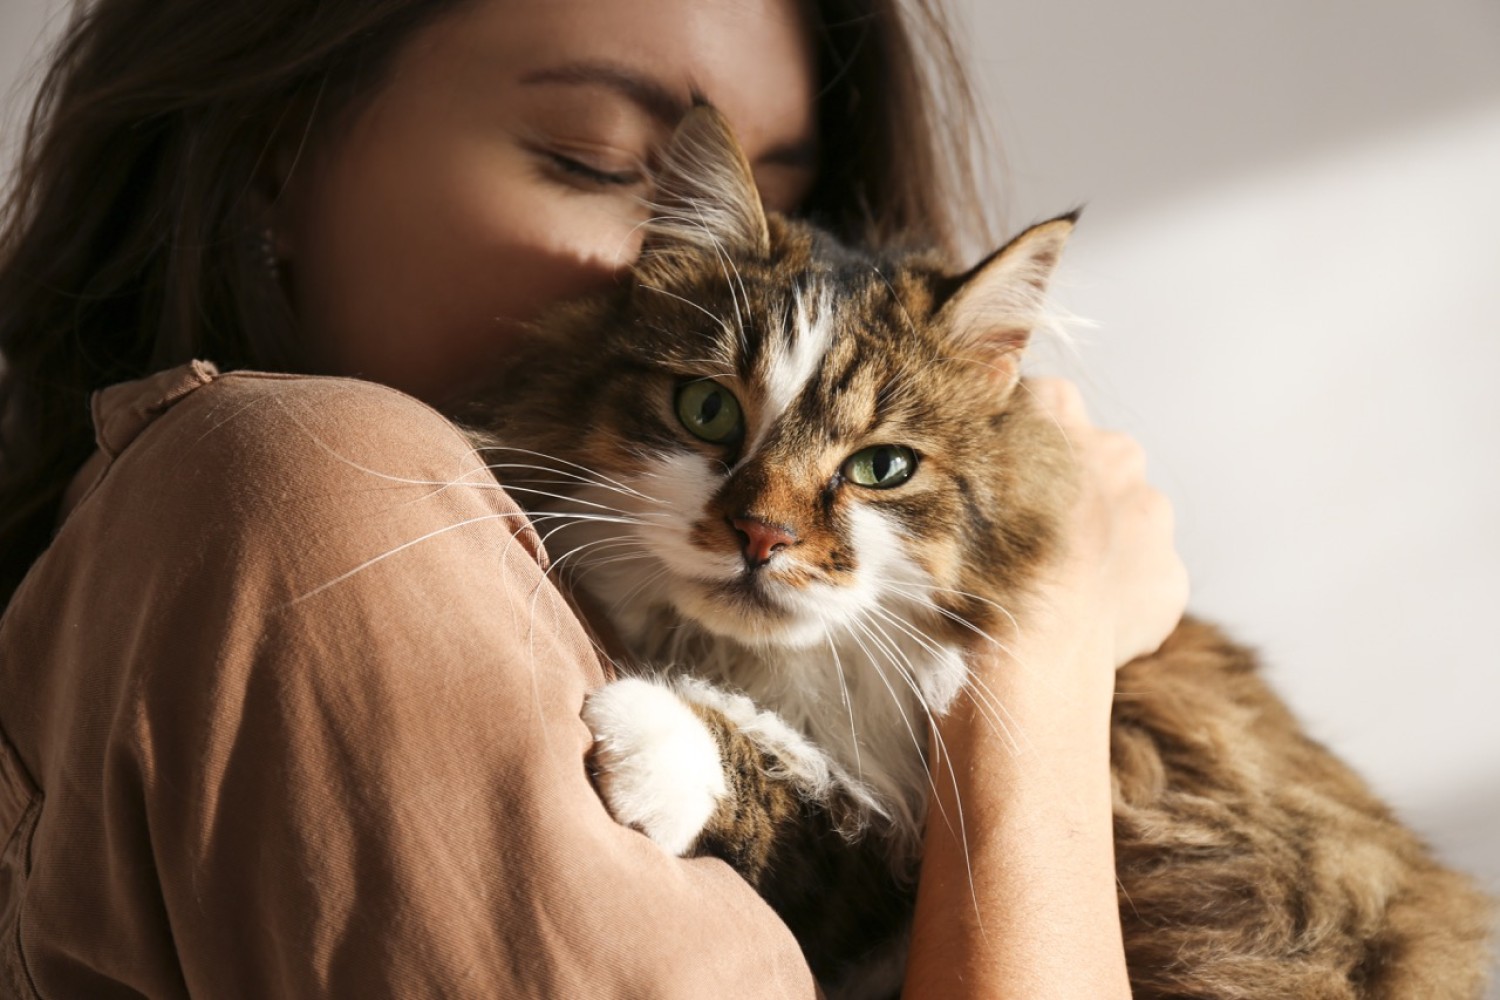 10 things your pet loves